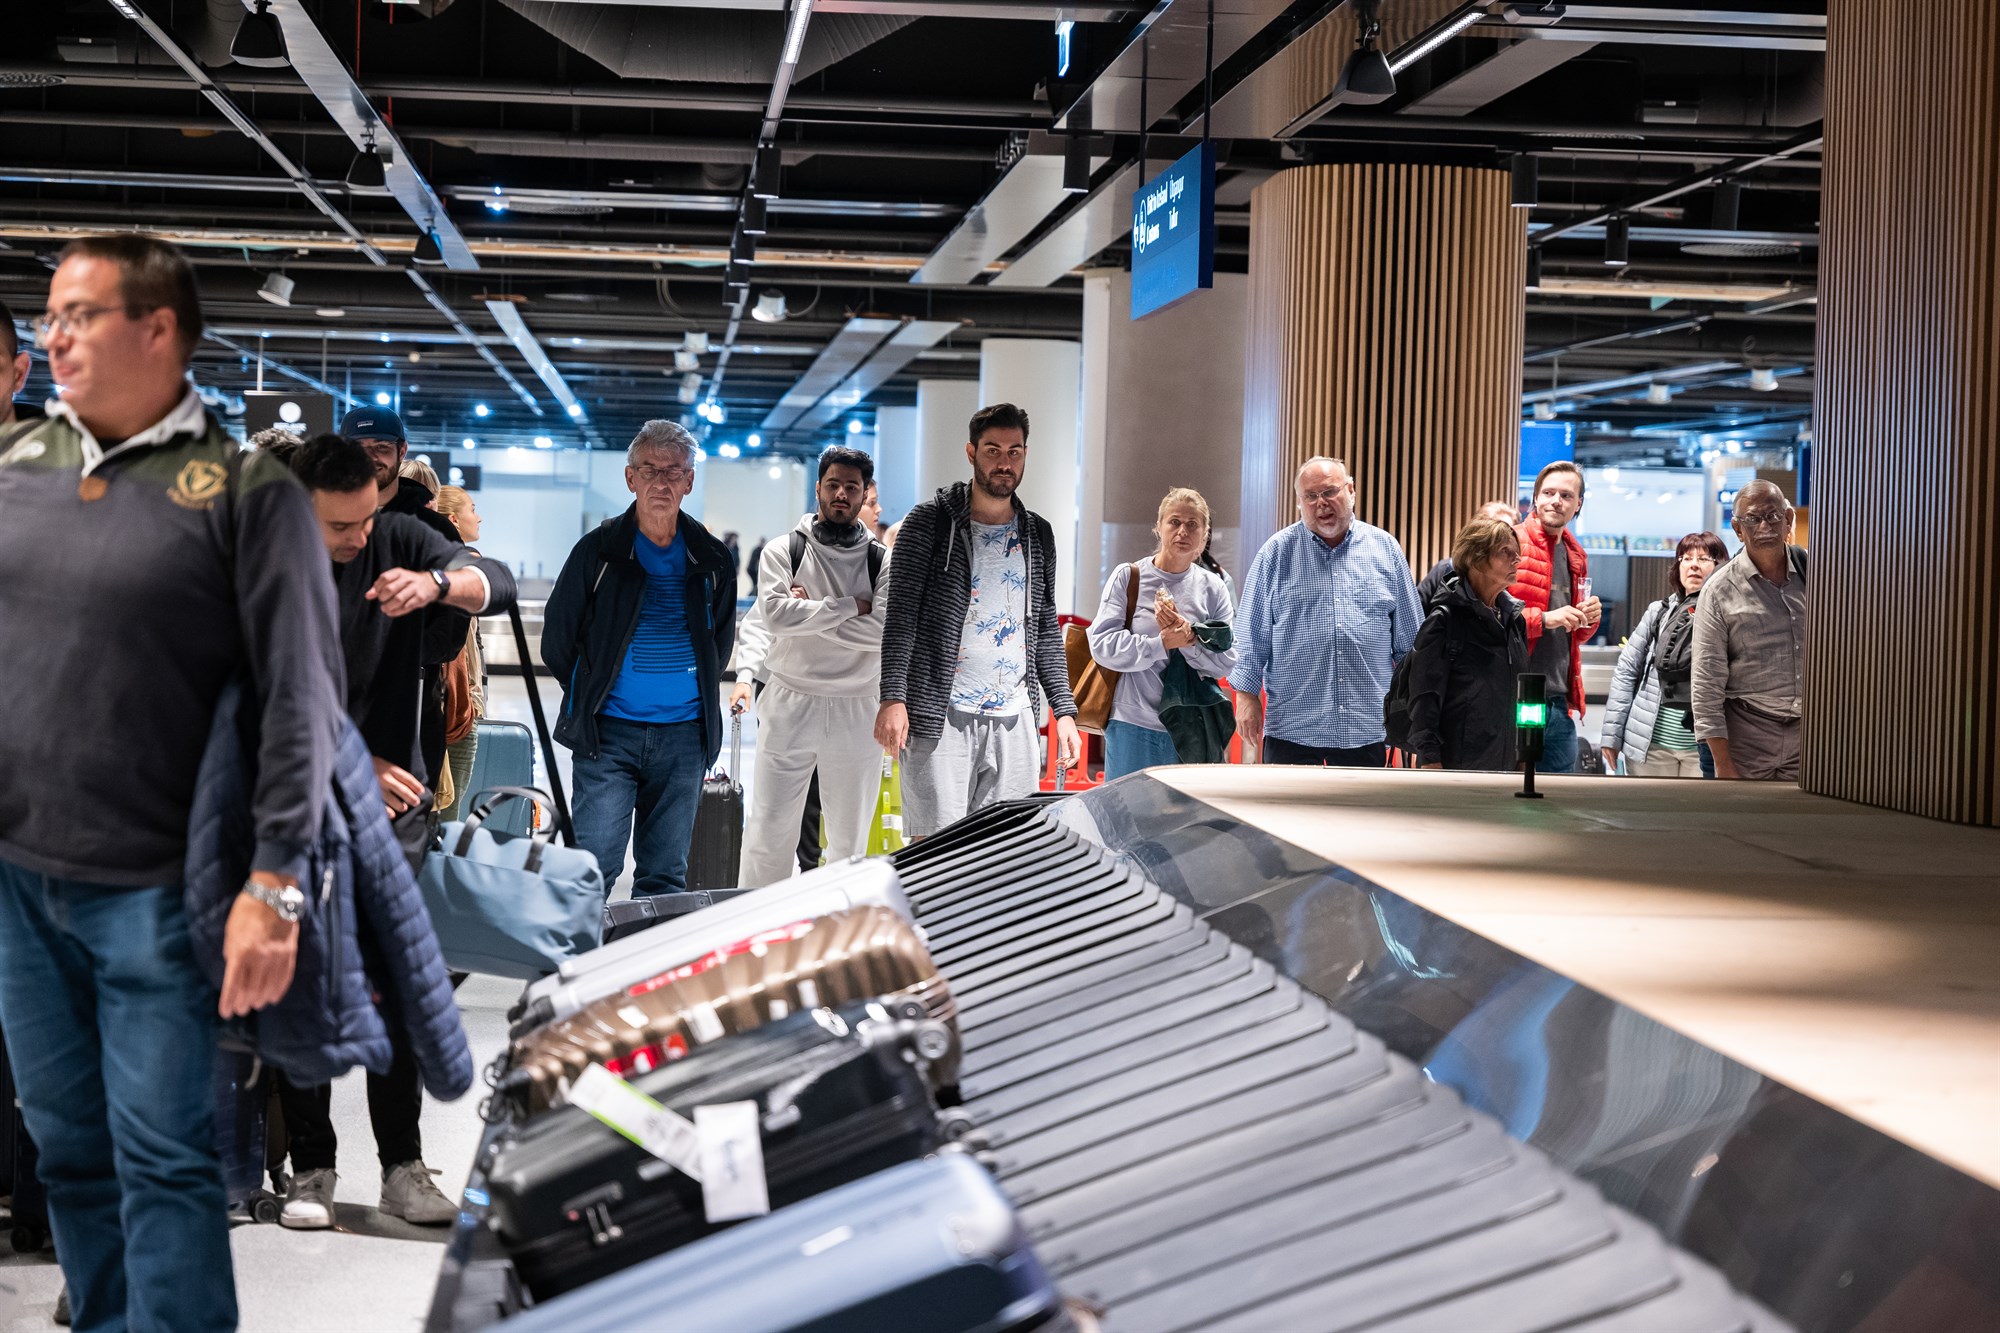 Expanded Baggage Hall Unveiled at Keflavík Airport